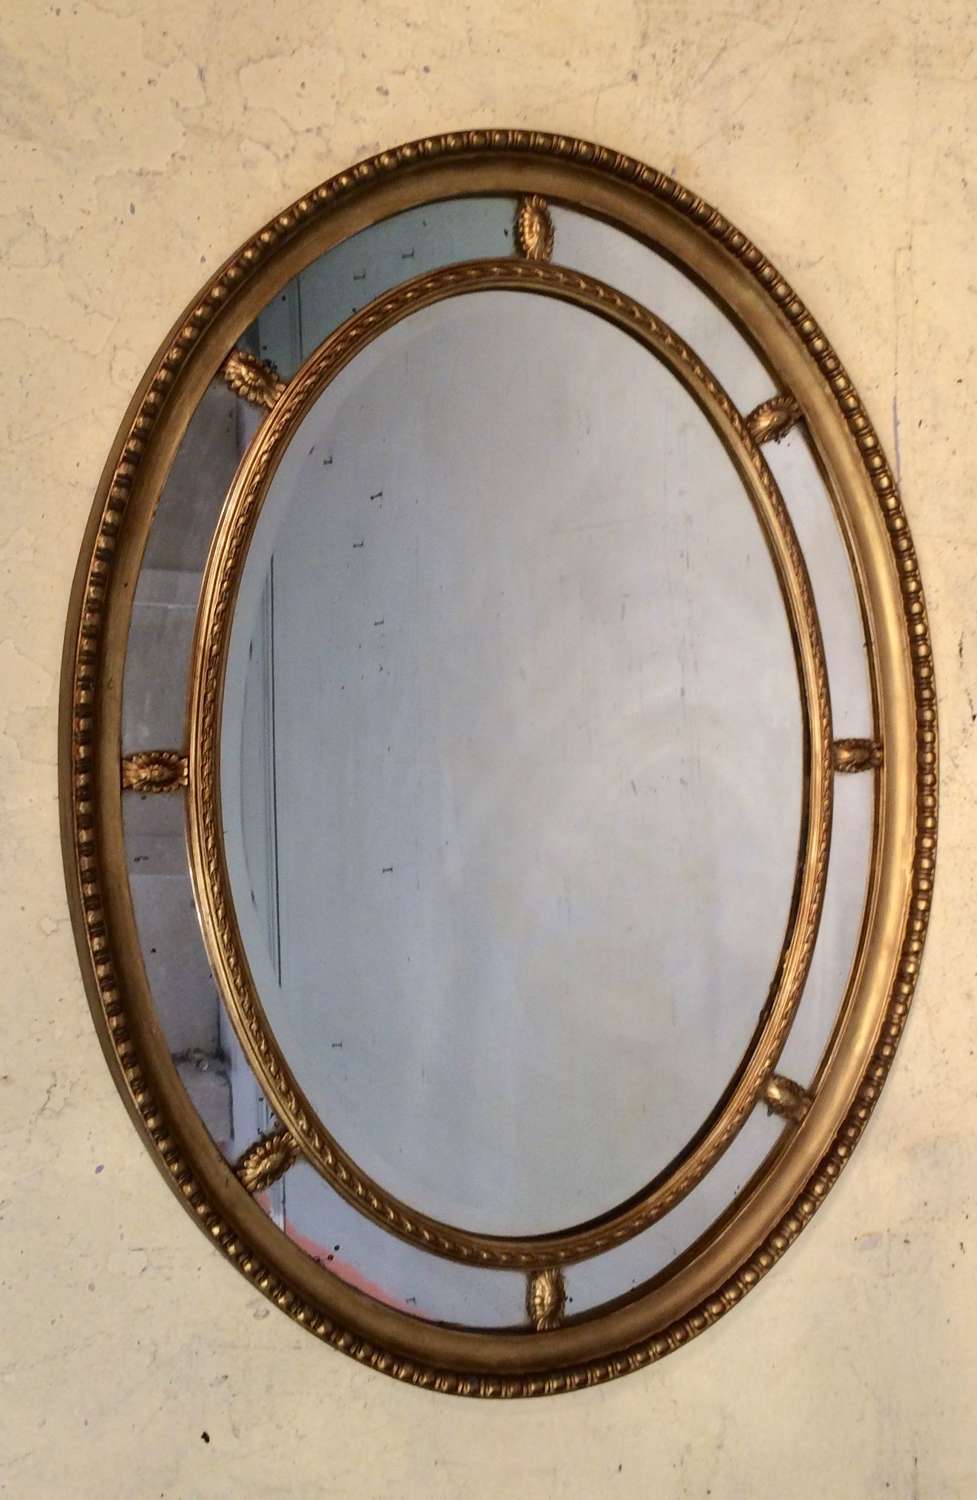 19th century oval carved giltwood mirror.